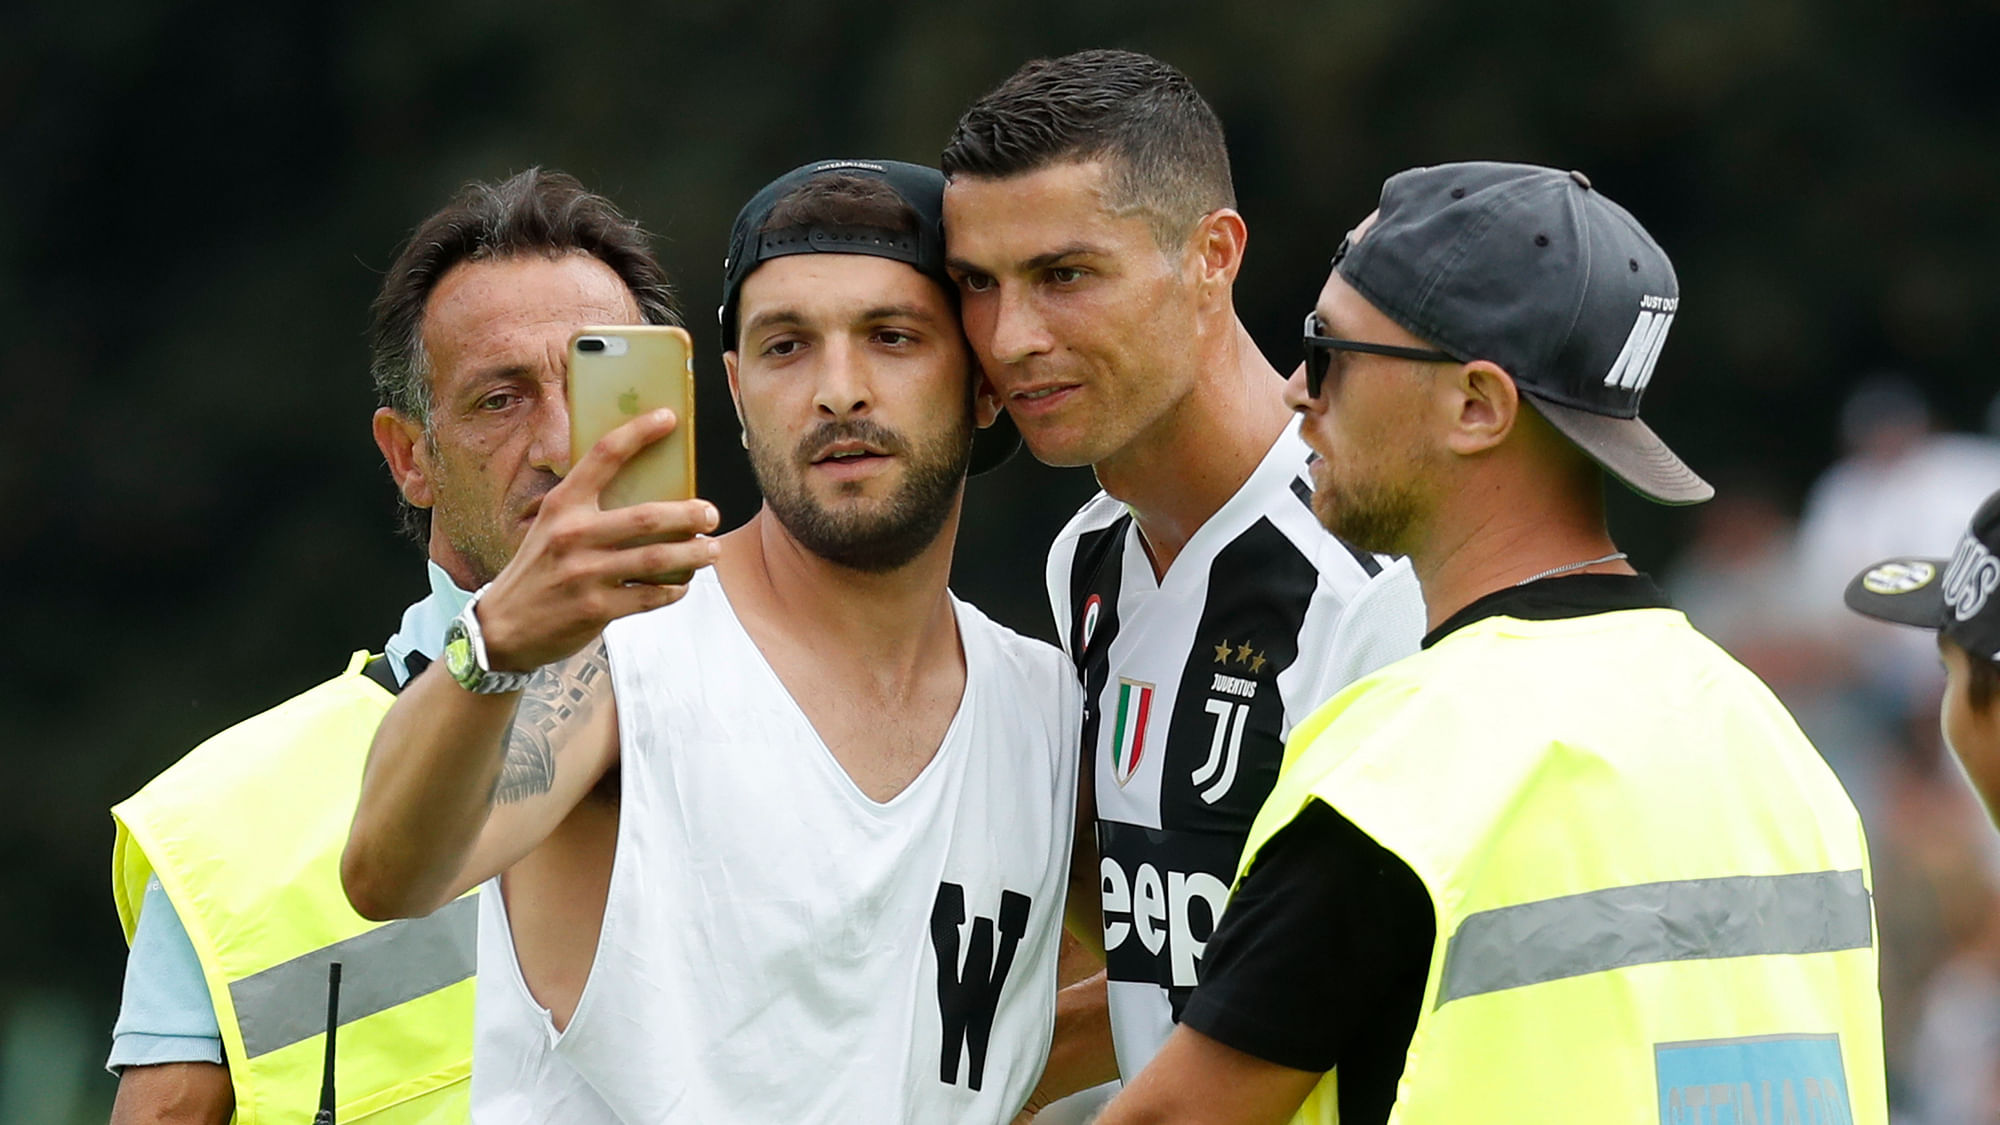 Juventus’ Cristiano Ronaldo gets a picture clicked with a fan.